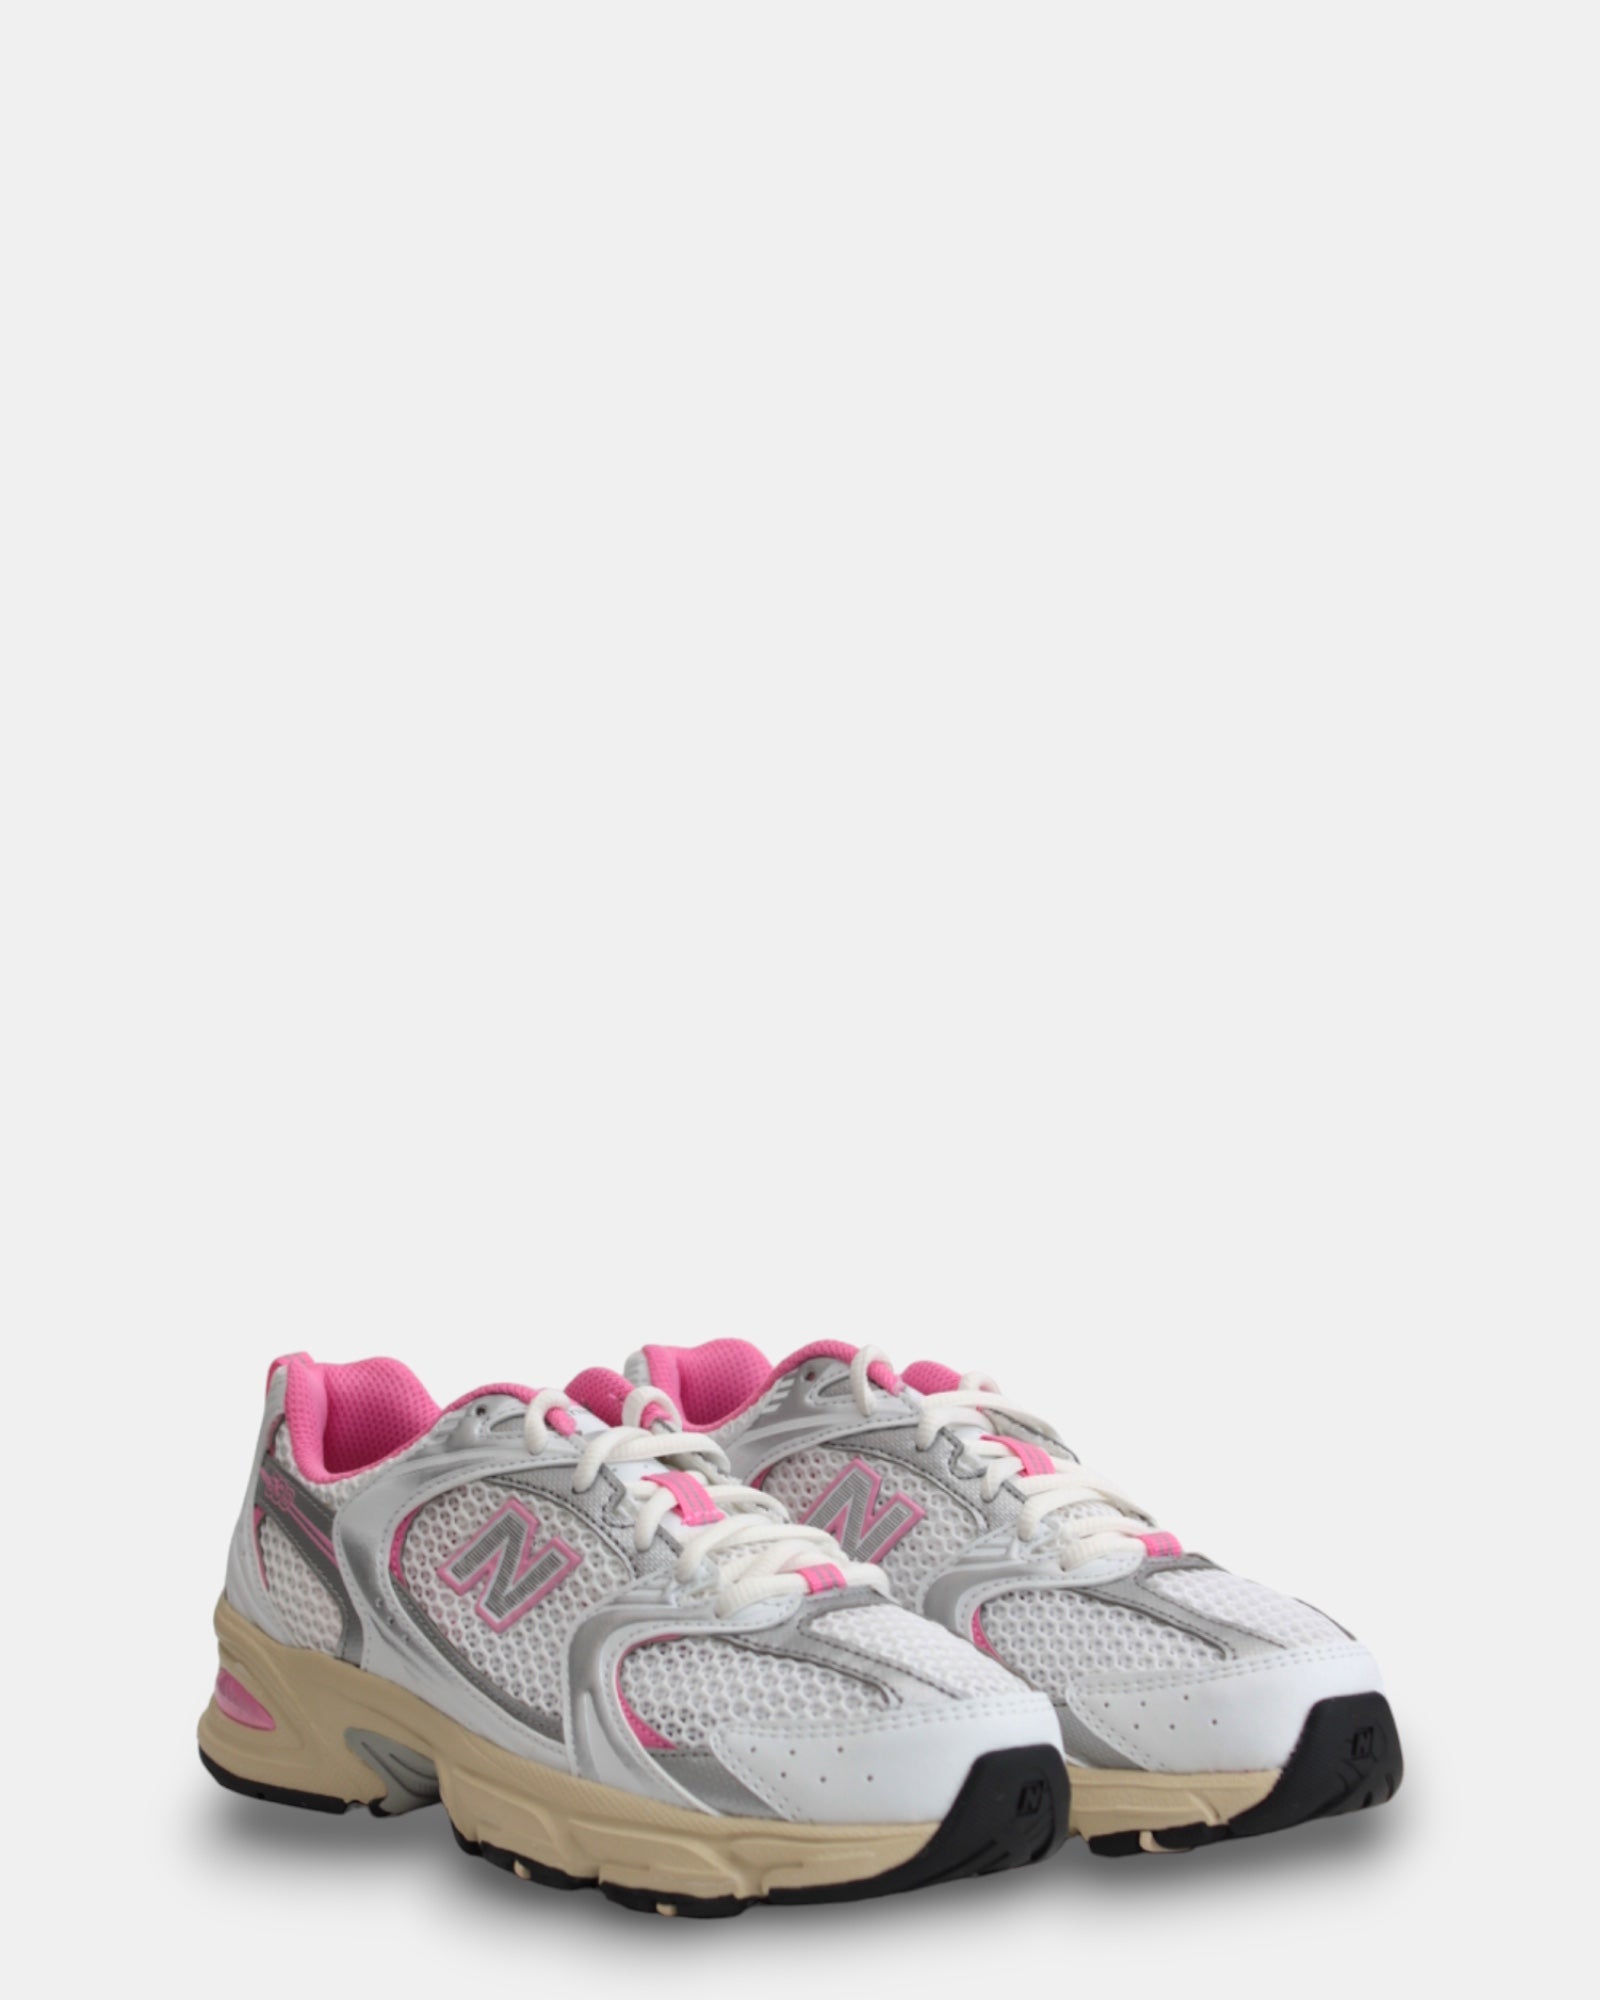 SNEAKERS White/pink New Balance